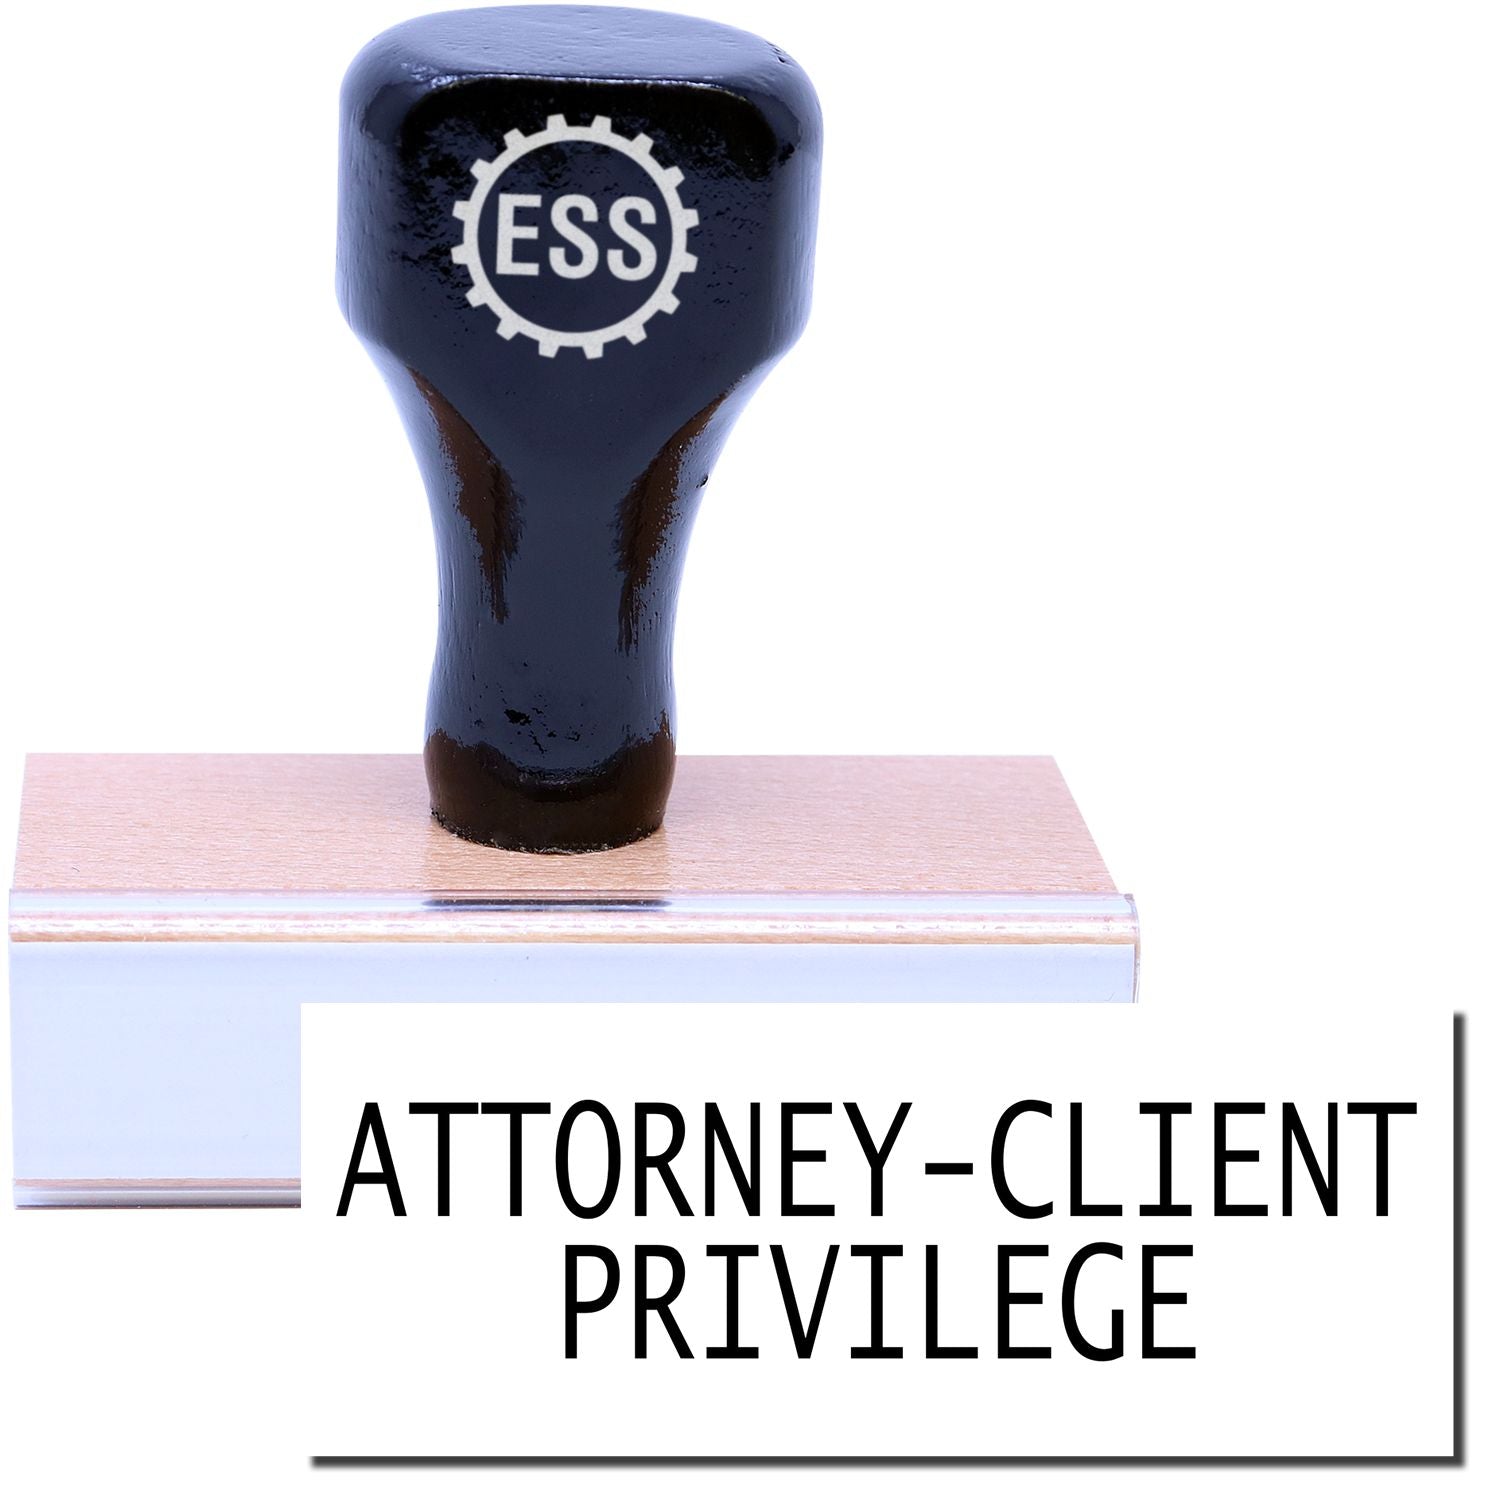 A stock office rubber stamp with a stamped image showing how the text "ATTORNEY-CLIENT PRIVILEGE" in a large font is displayed after stamping.